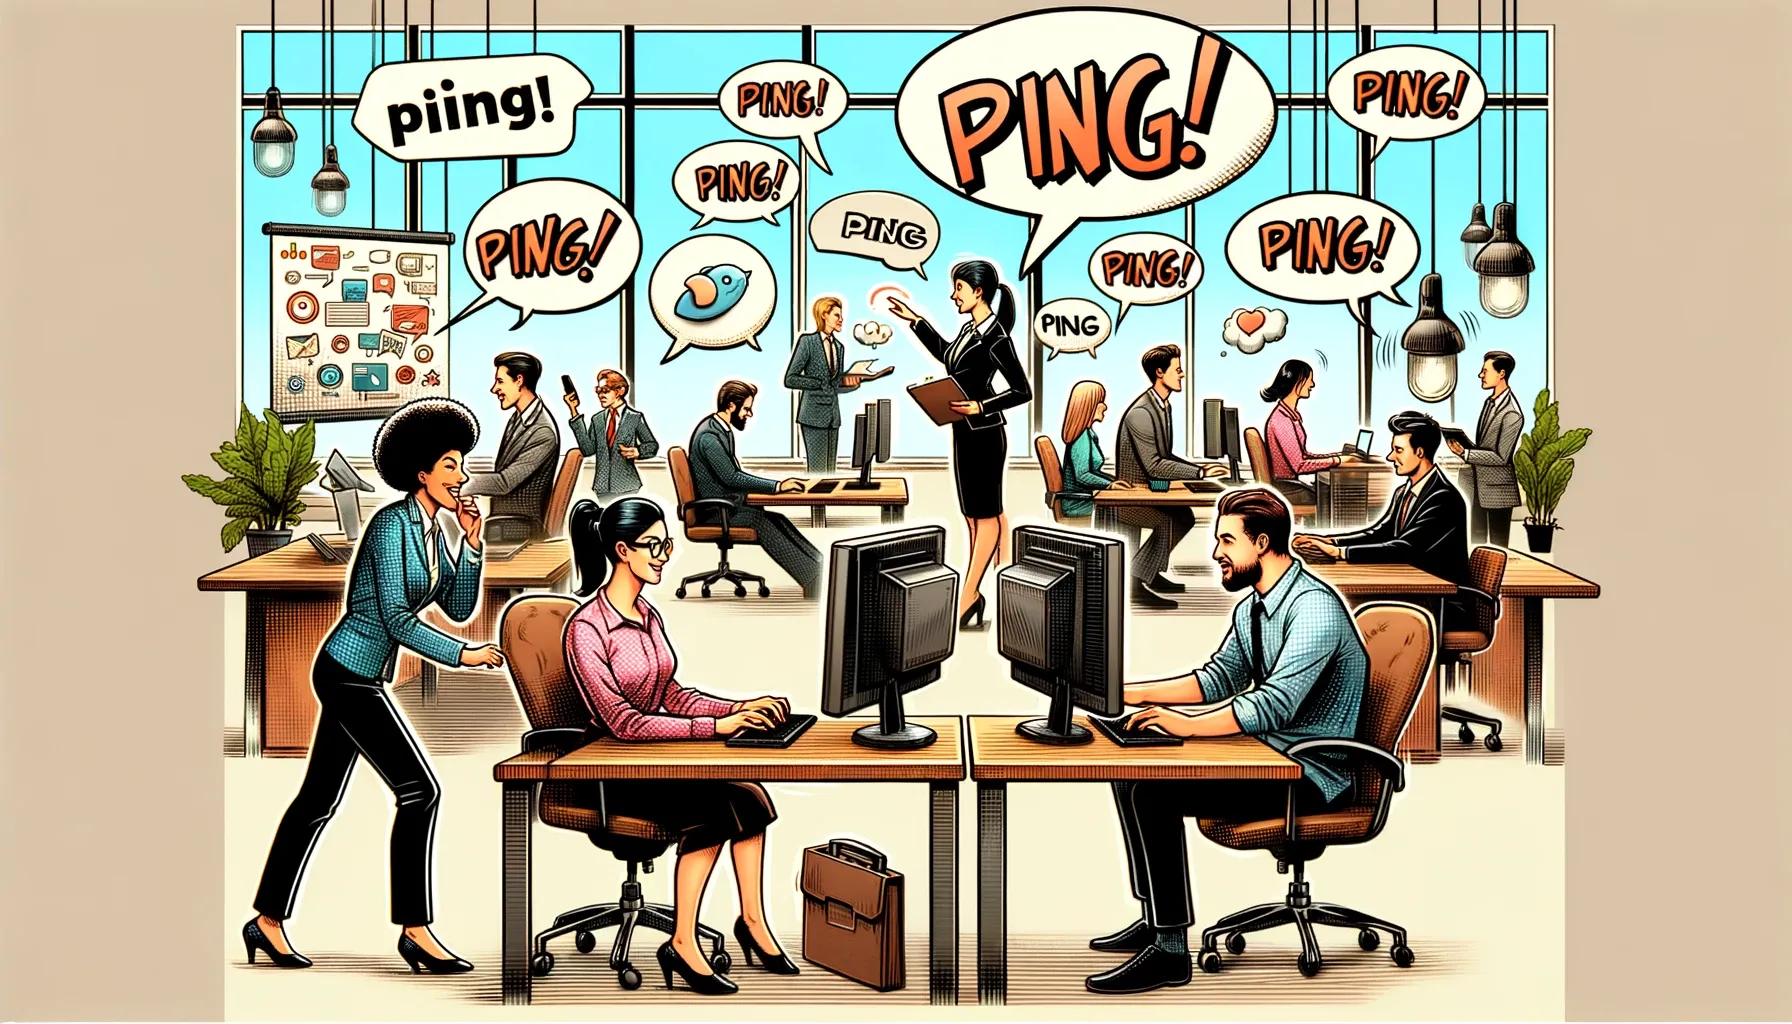 Why Do They Use The Phrase "Ping Me" In The Workplace?